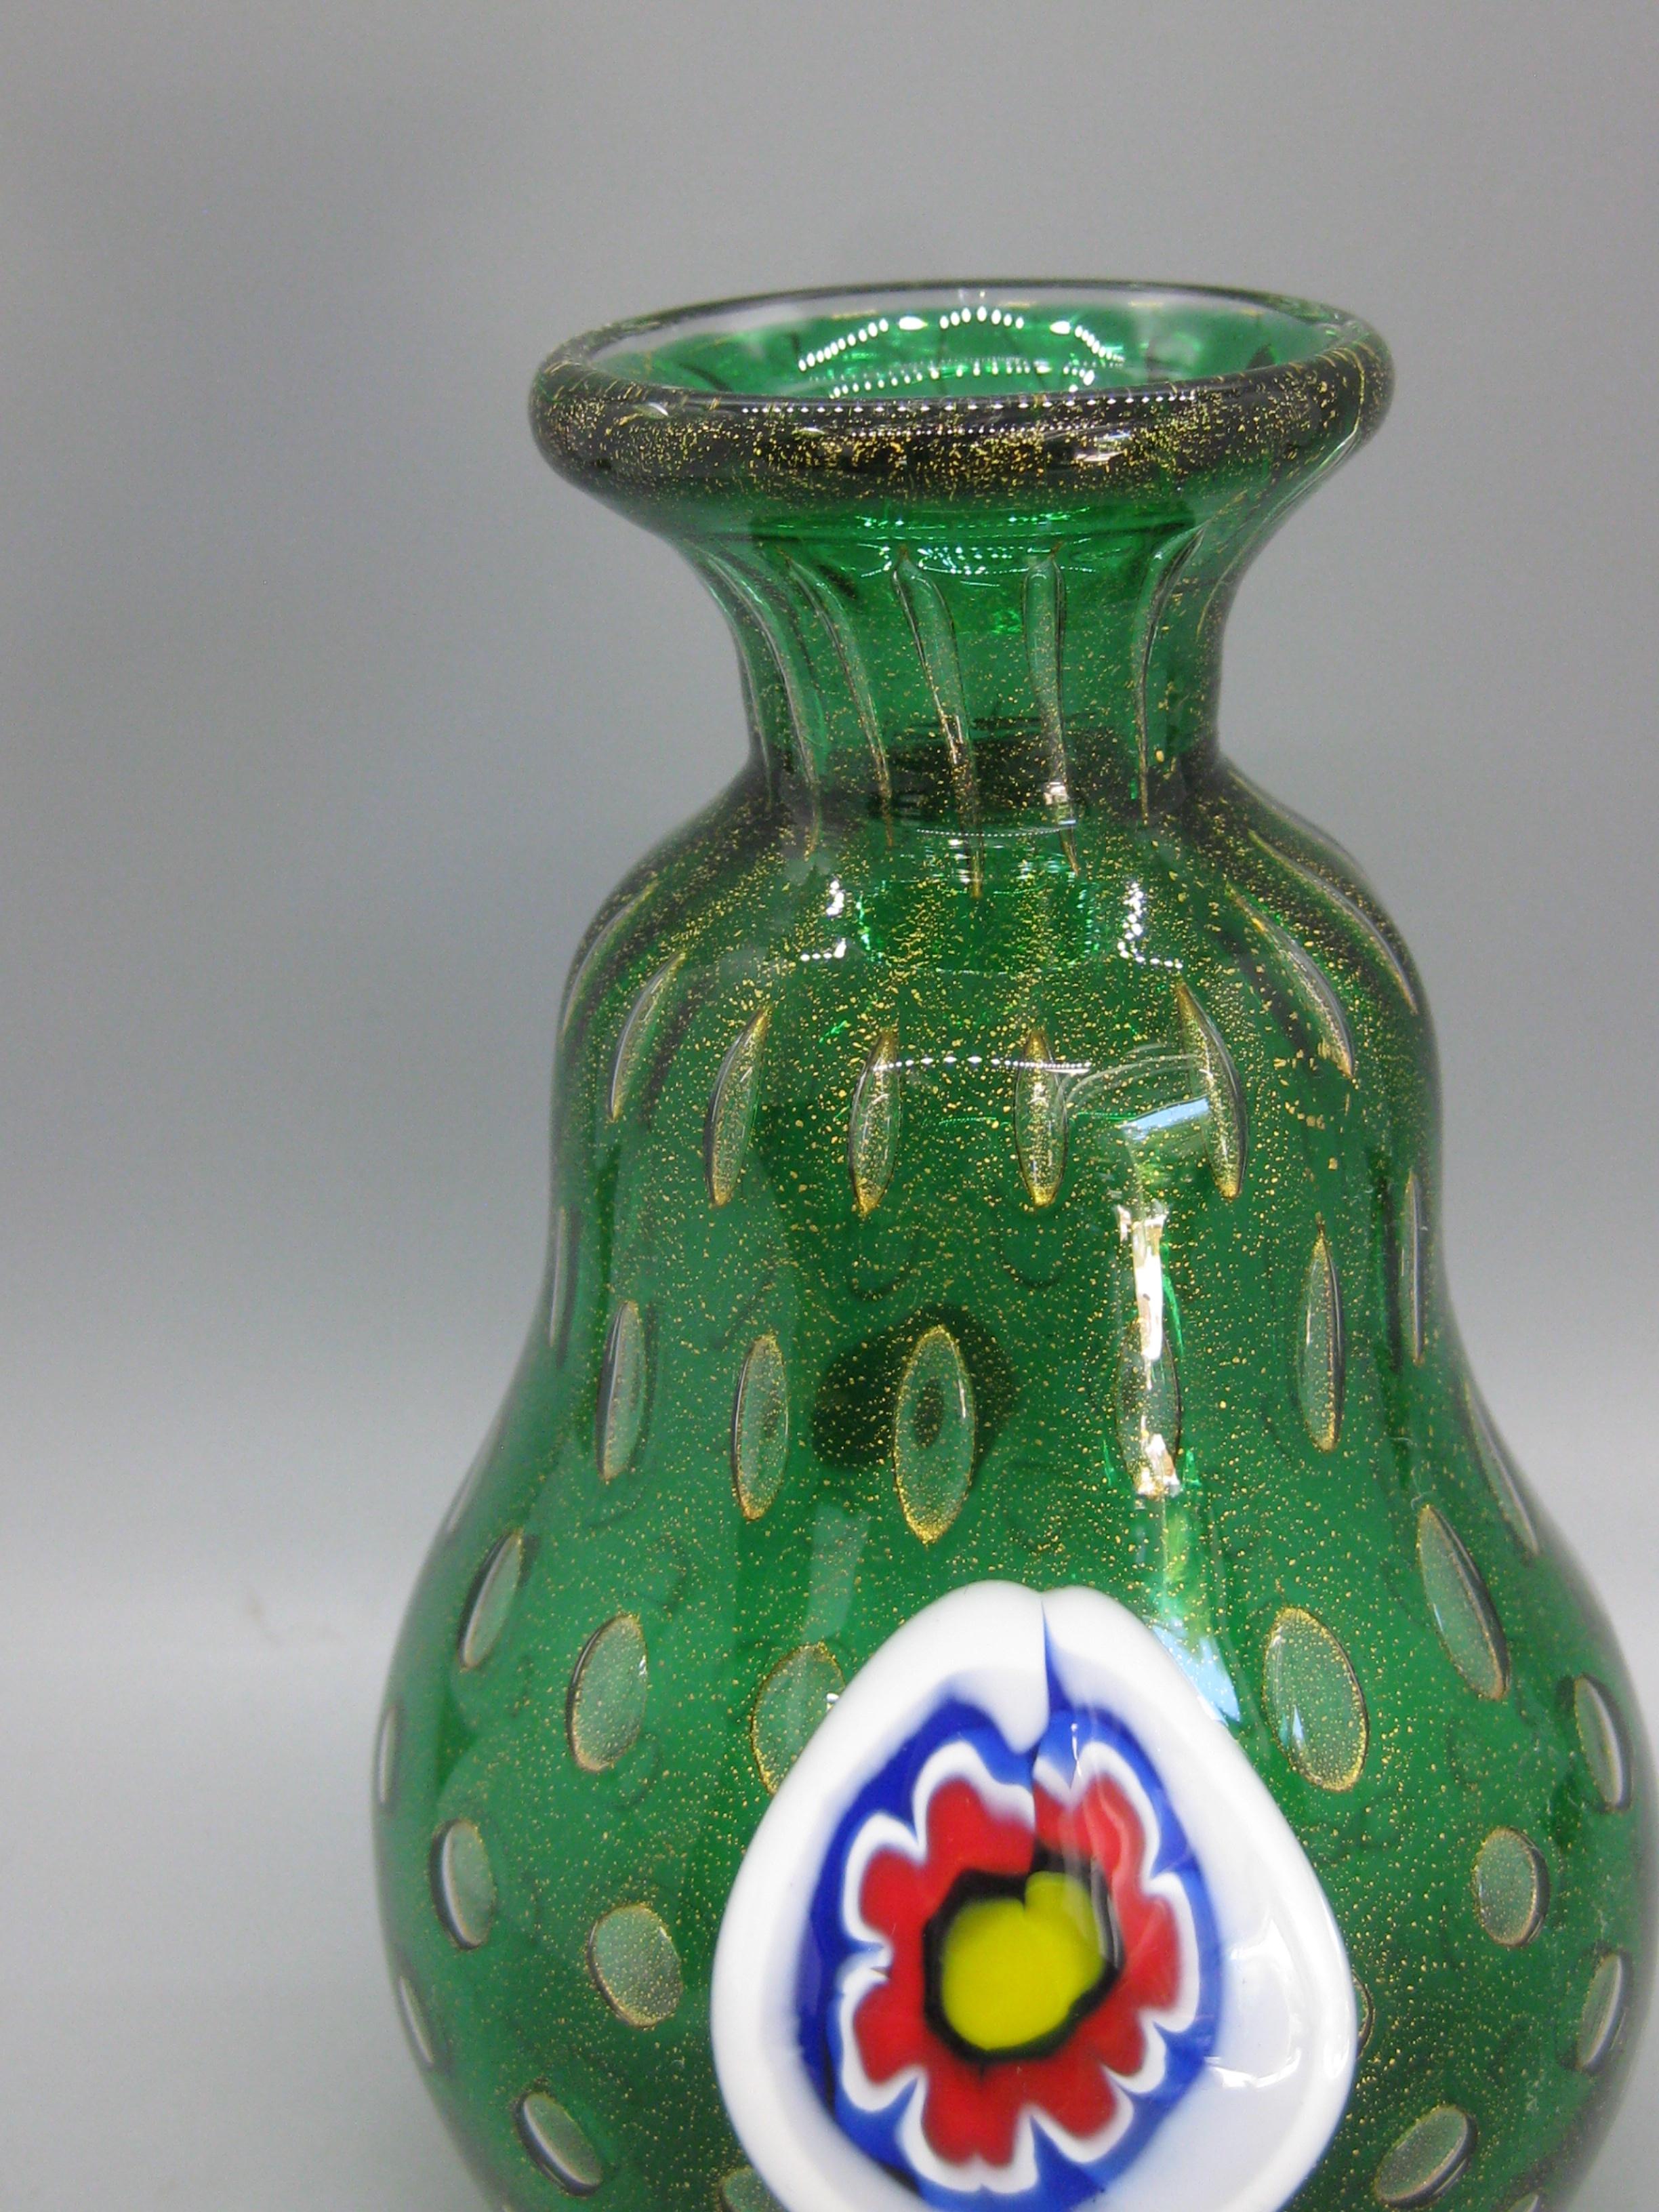 Beautiful controlled bubble green art glass vase made by Mario Bambaro for Murano glass, circa 1960s. Gold fleck throughout the vase. Has a millefiori design on the front. Has the original foil label on the bottom. Made in Italy. In excellent